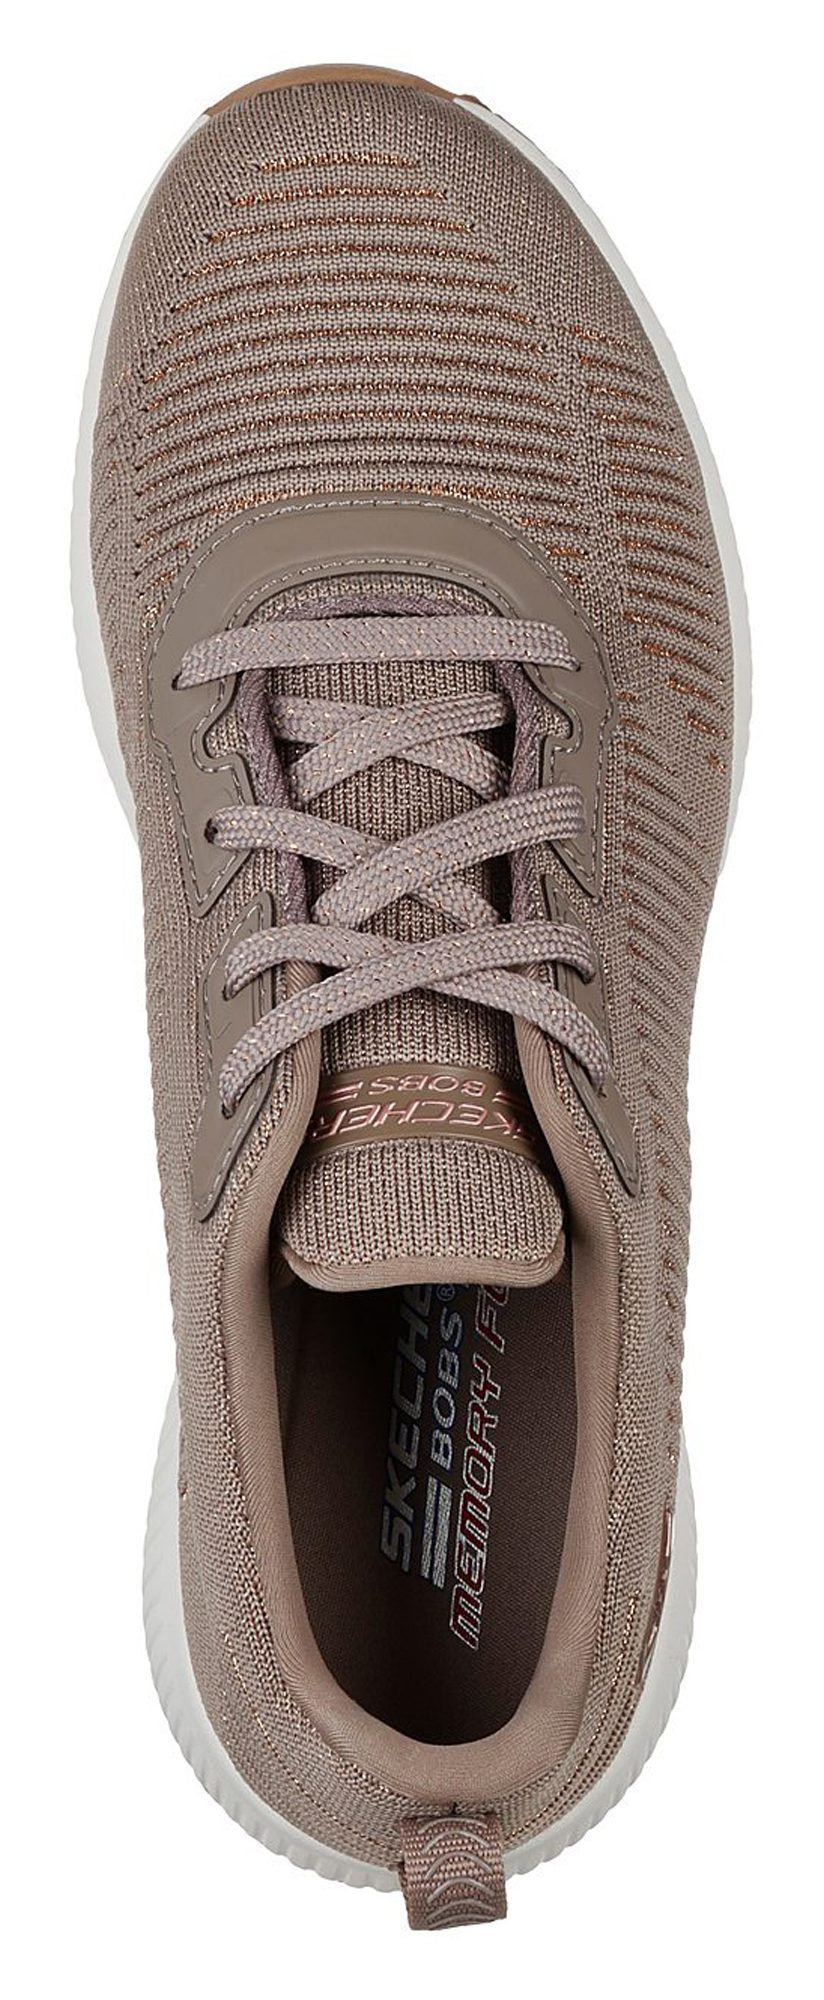 Skechers BOBS Sport Squad - Glam League Taupe 31347 TPE - Womens ...